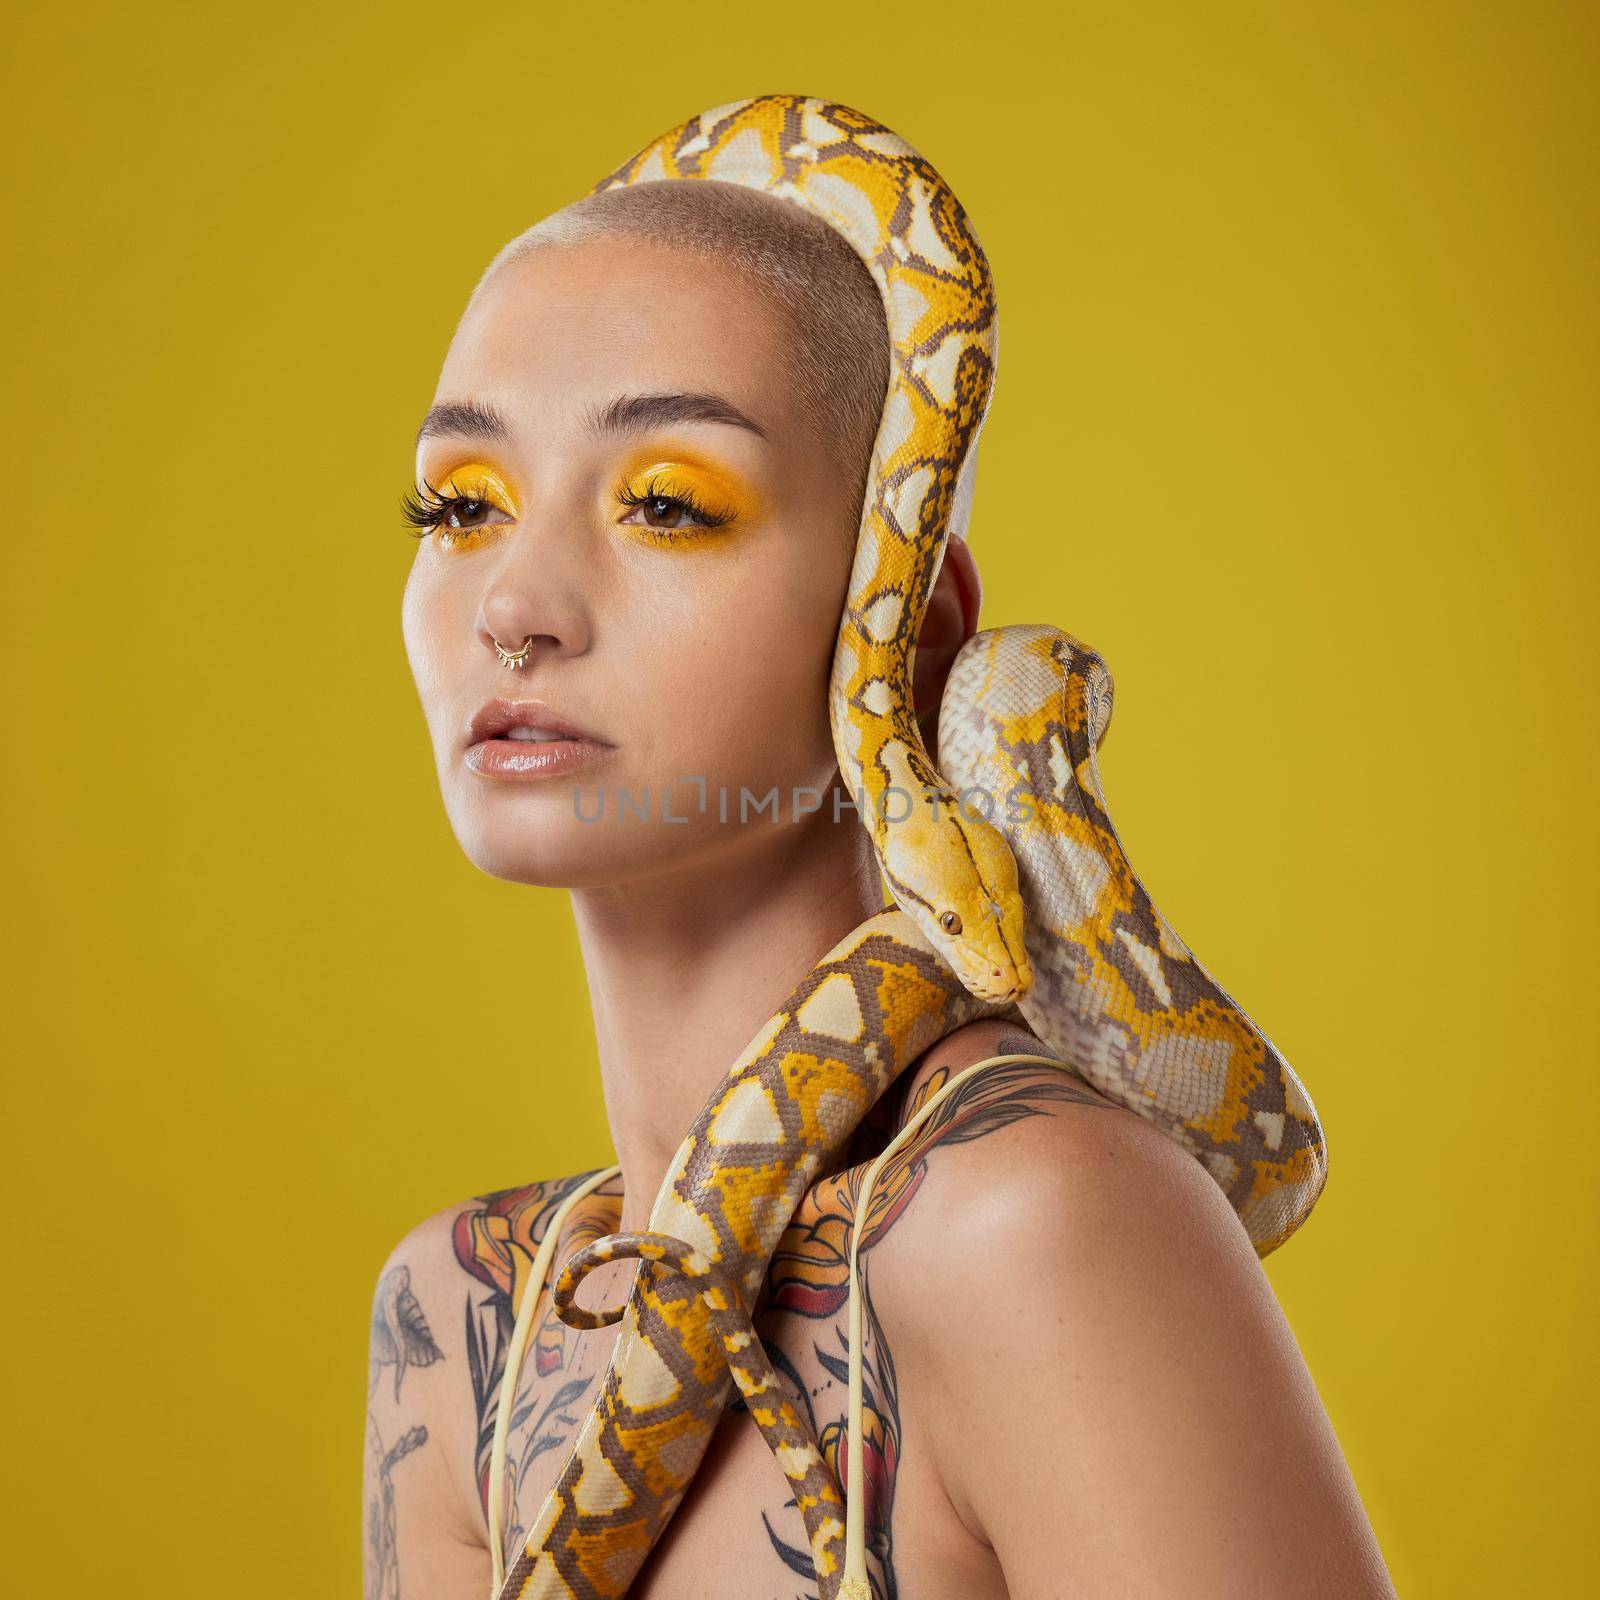 Shot of a young woman posing with a snake on her head against a yellow background.